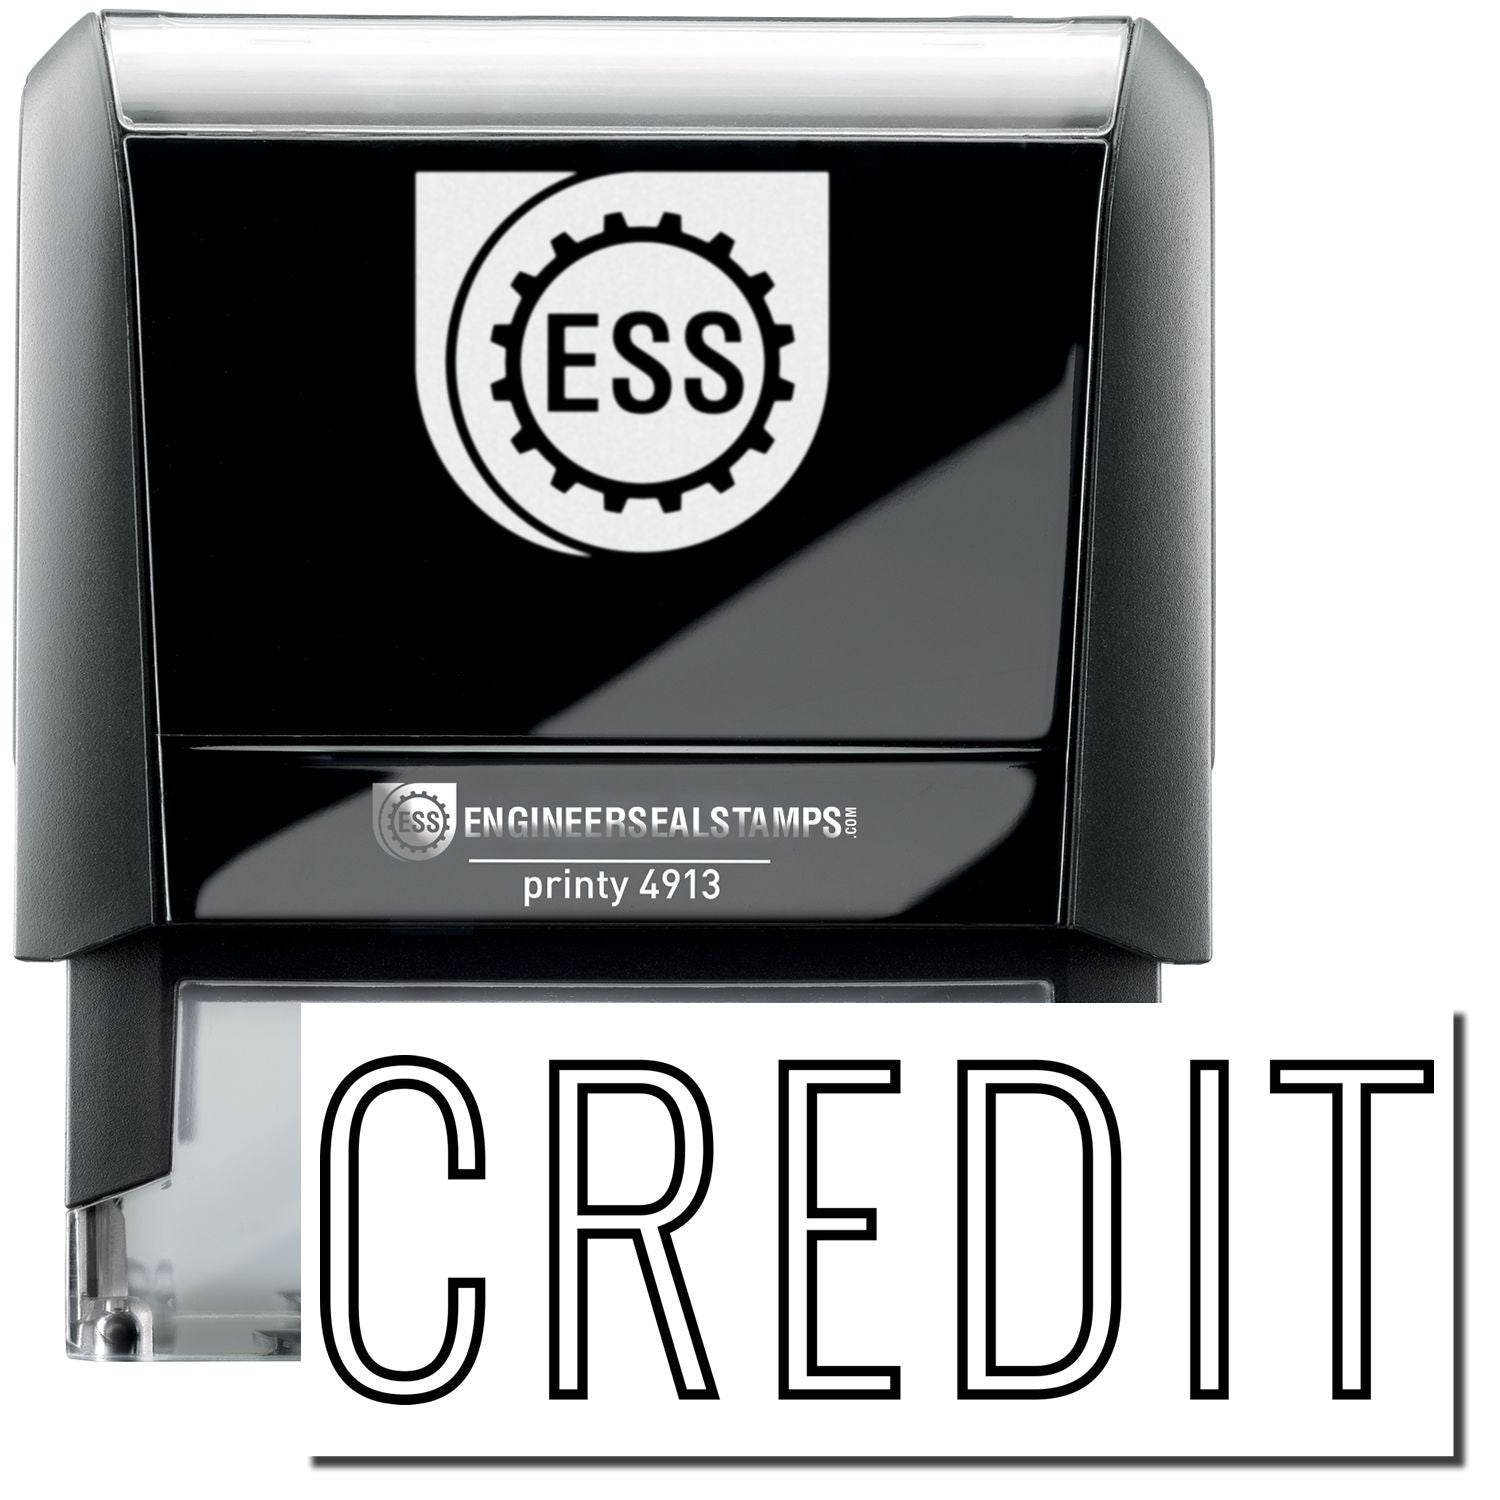 A self-inking stamp with a stamped image showing how the text "CREDIT" in a large outline style is displayed by it after stamping.